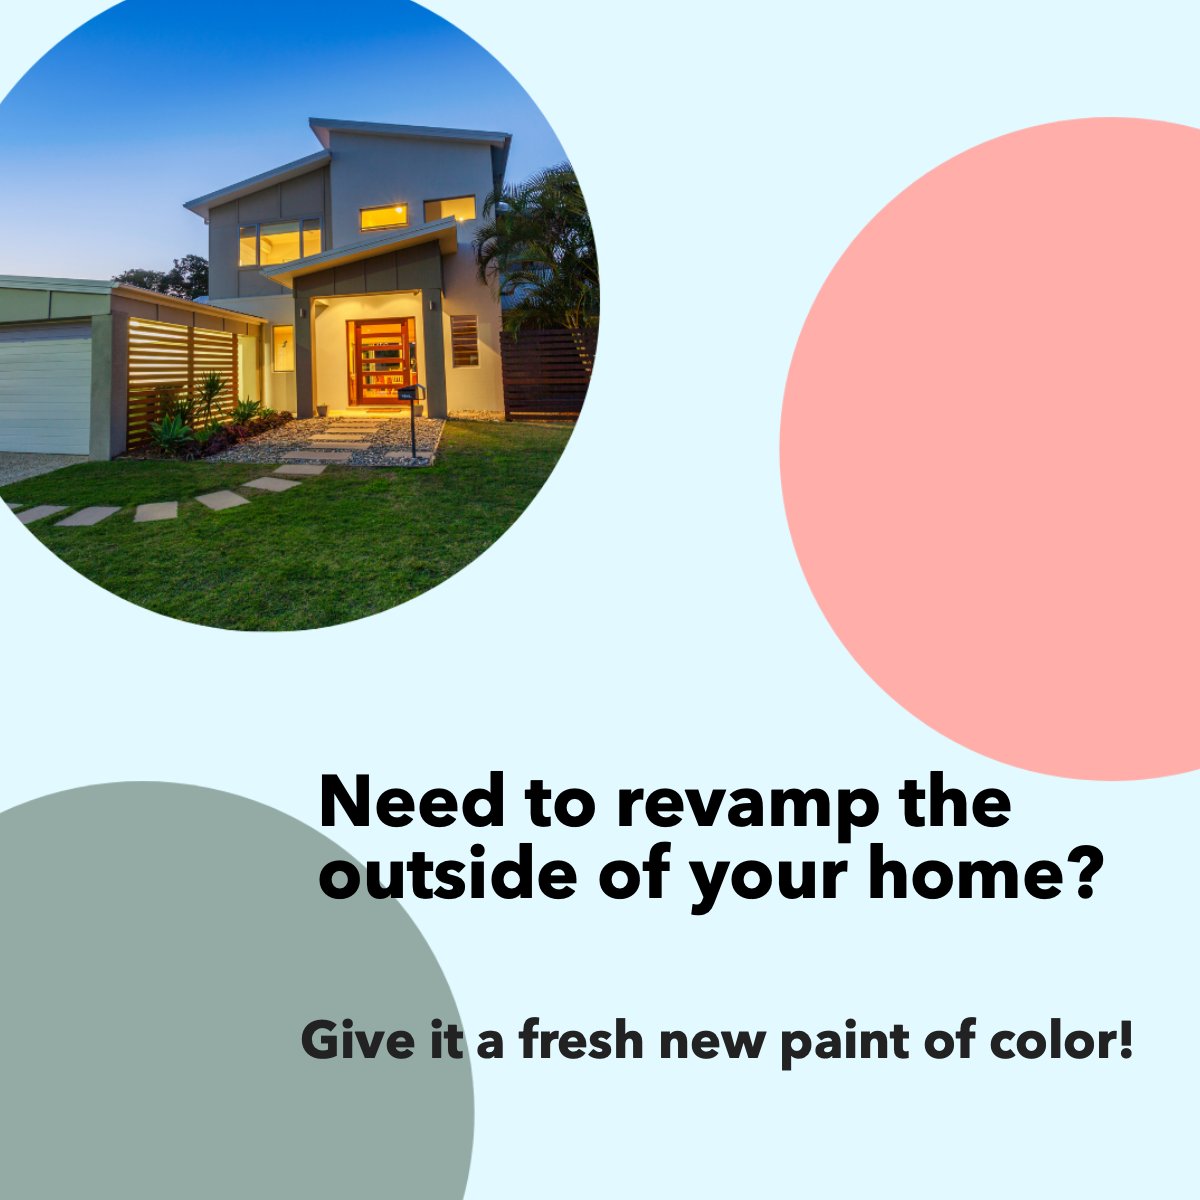 Need to revamp the outside of your home? 🎨

An exterior makeover can maximize curb appeal and give your home a whole new look. 😎

#paintingideas   #paint   #revamp
#Whoyouworkwithmatters #NolaRealEstate #LovewhoIworkwith #REALTOR #Homeowners